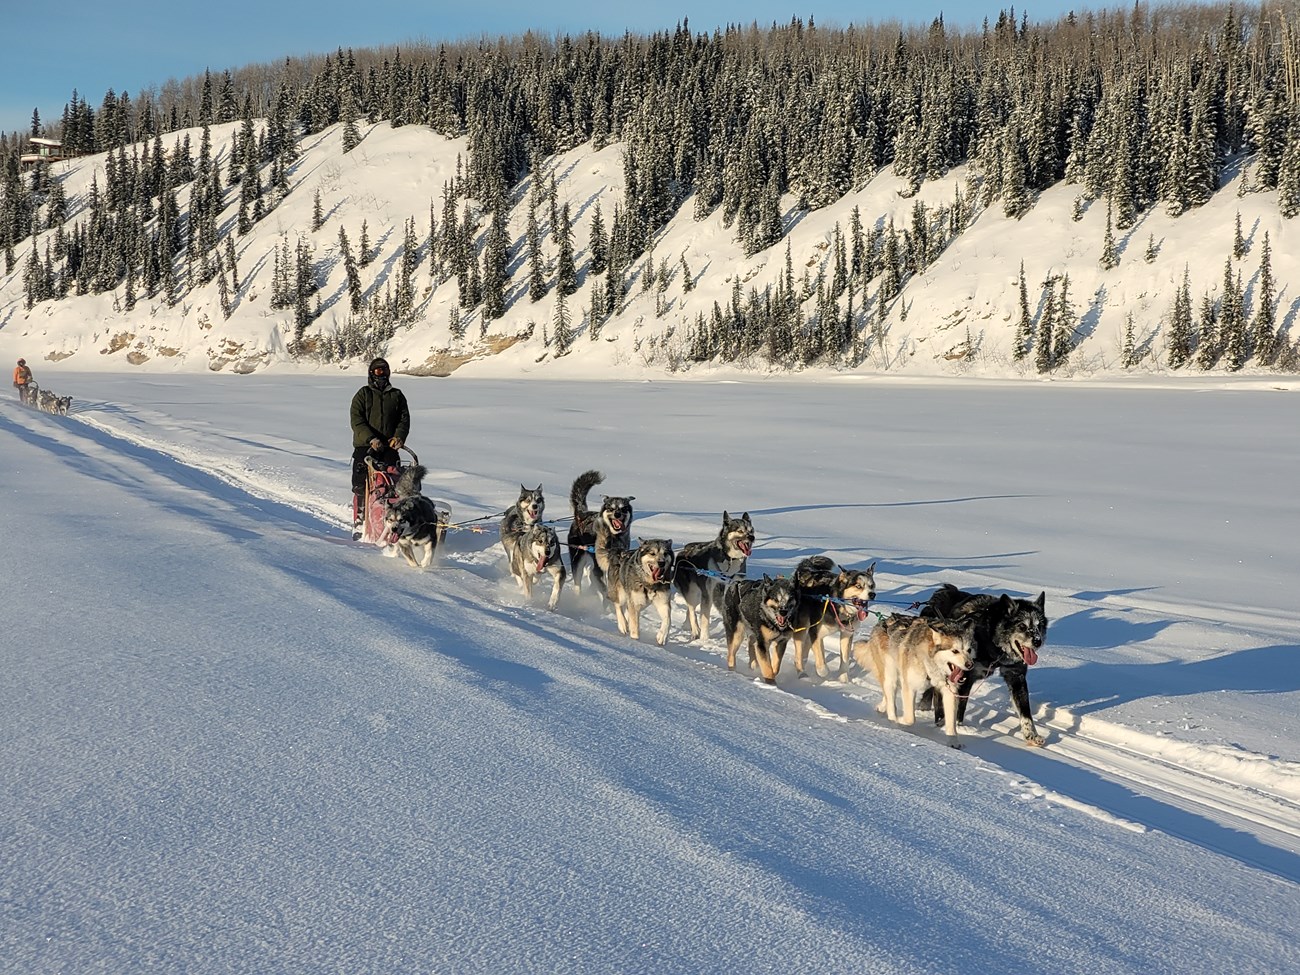 A team of 10 dogs and a musher travel down a wide, flat, snowy path along a frozen river. At the edge of the riverbank is a small, forested hill. A second dog team follows behind them.